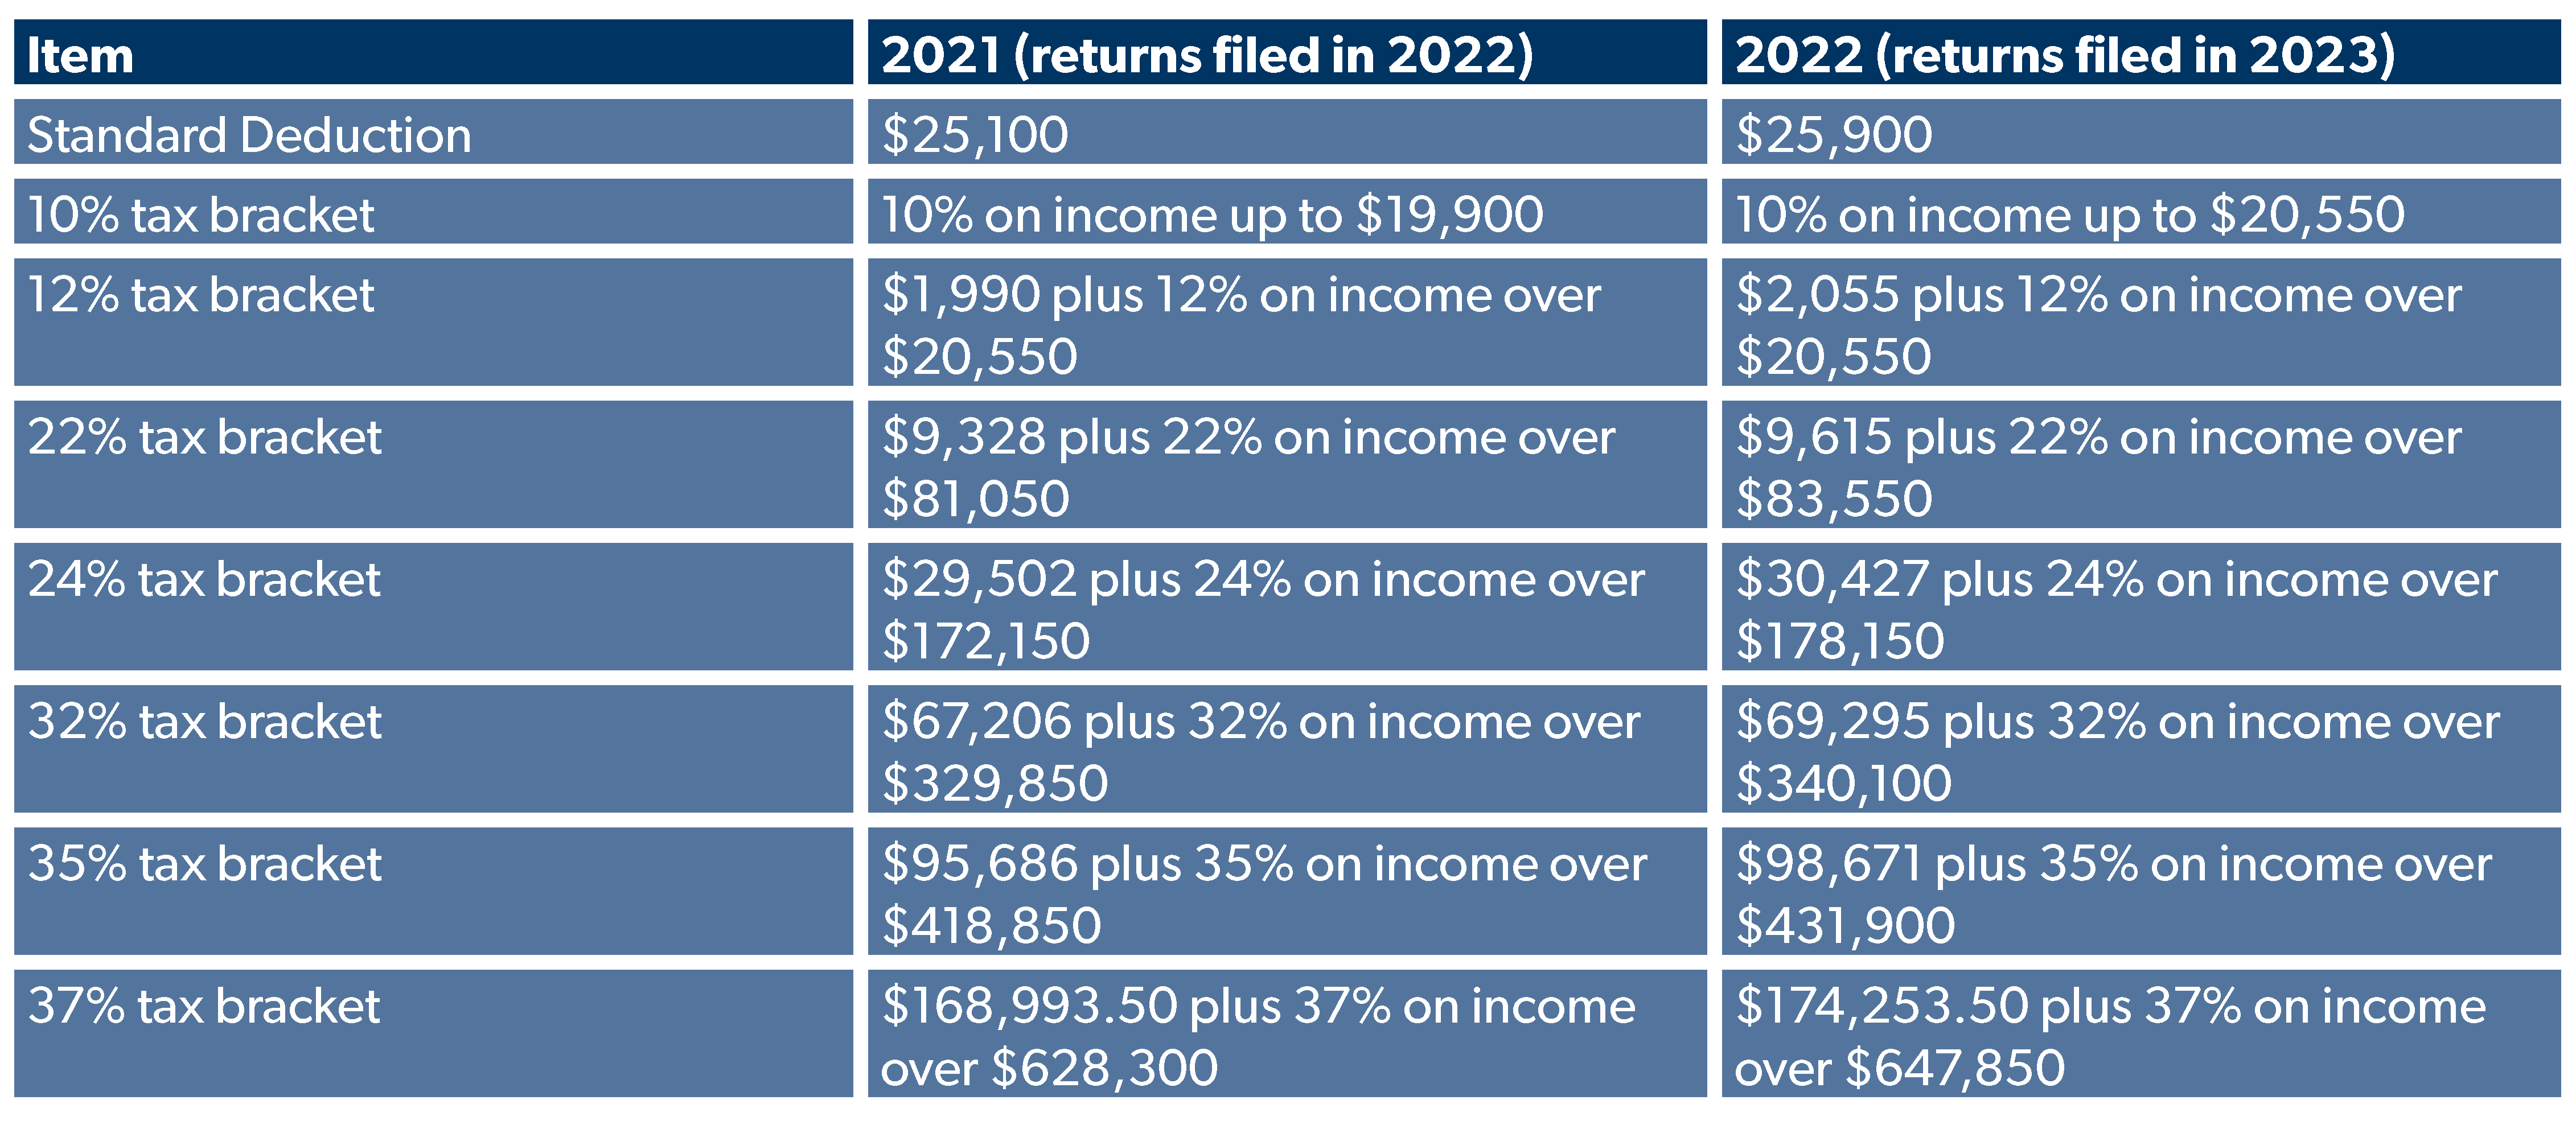 irs-announces-inflation-adjustments-to-2022-tax-brackets-foundation